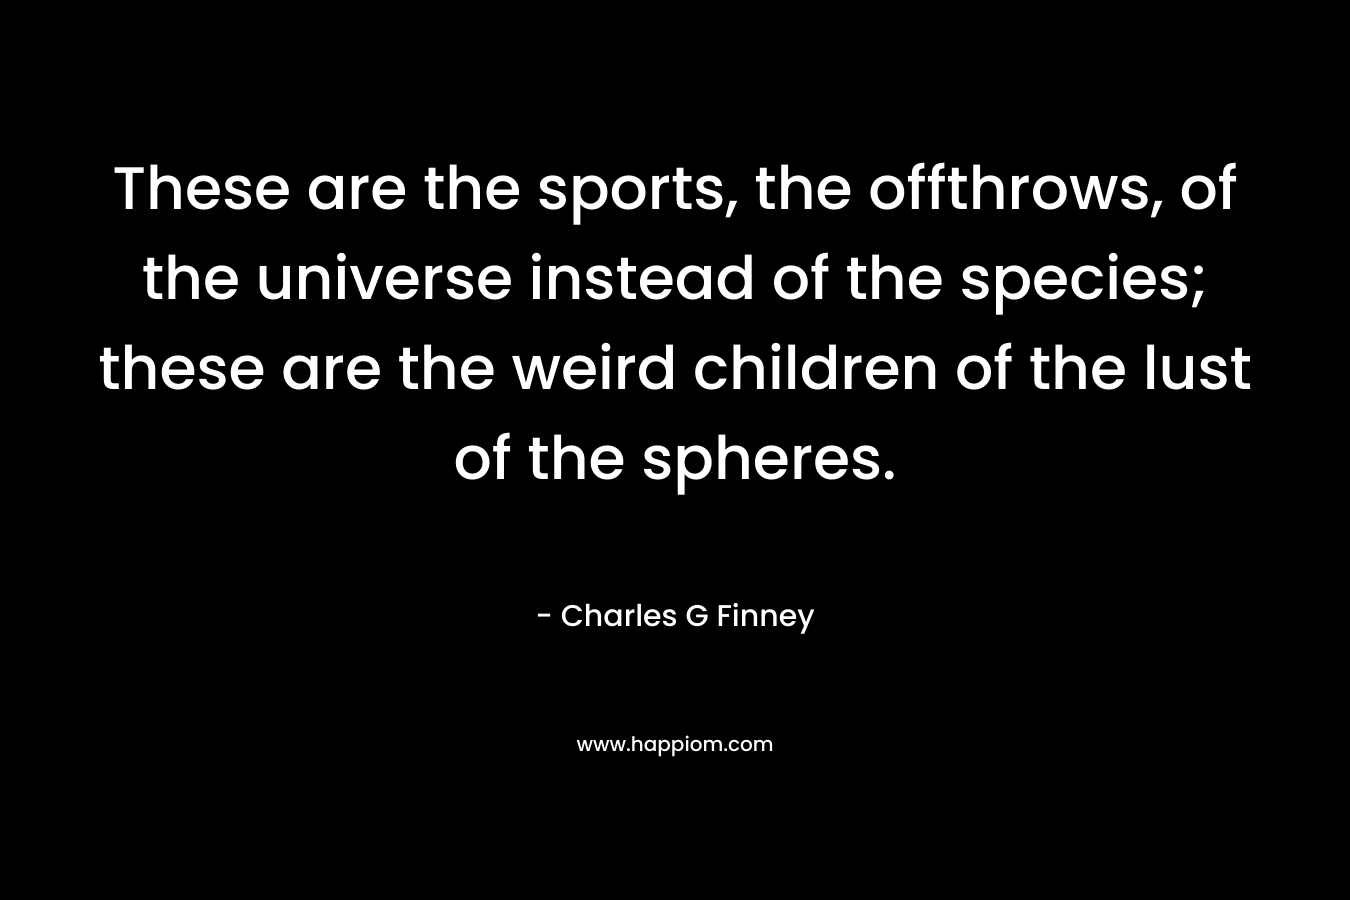 These are the sports, the offthrows, of the universe instead of the species; these are the weird children of the lust of the spheres.